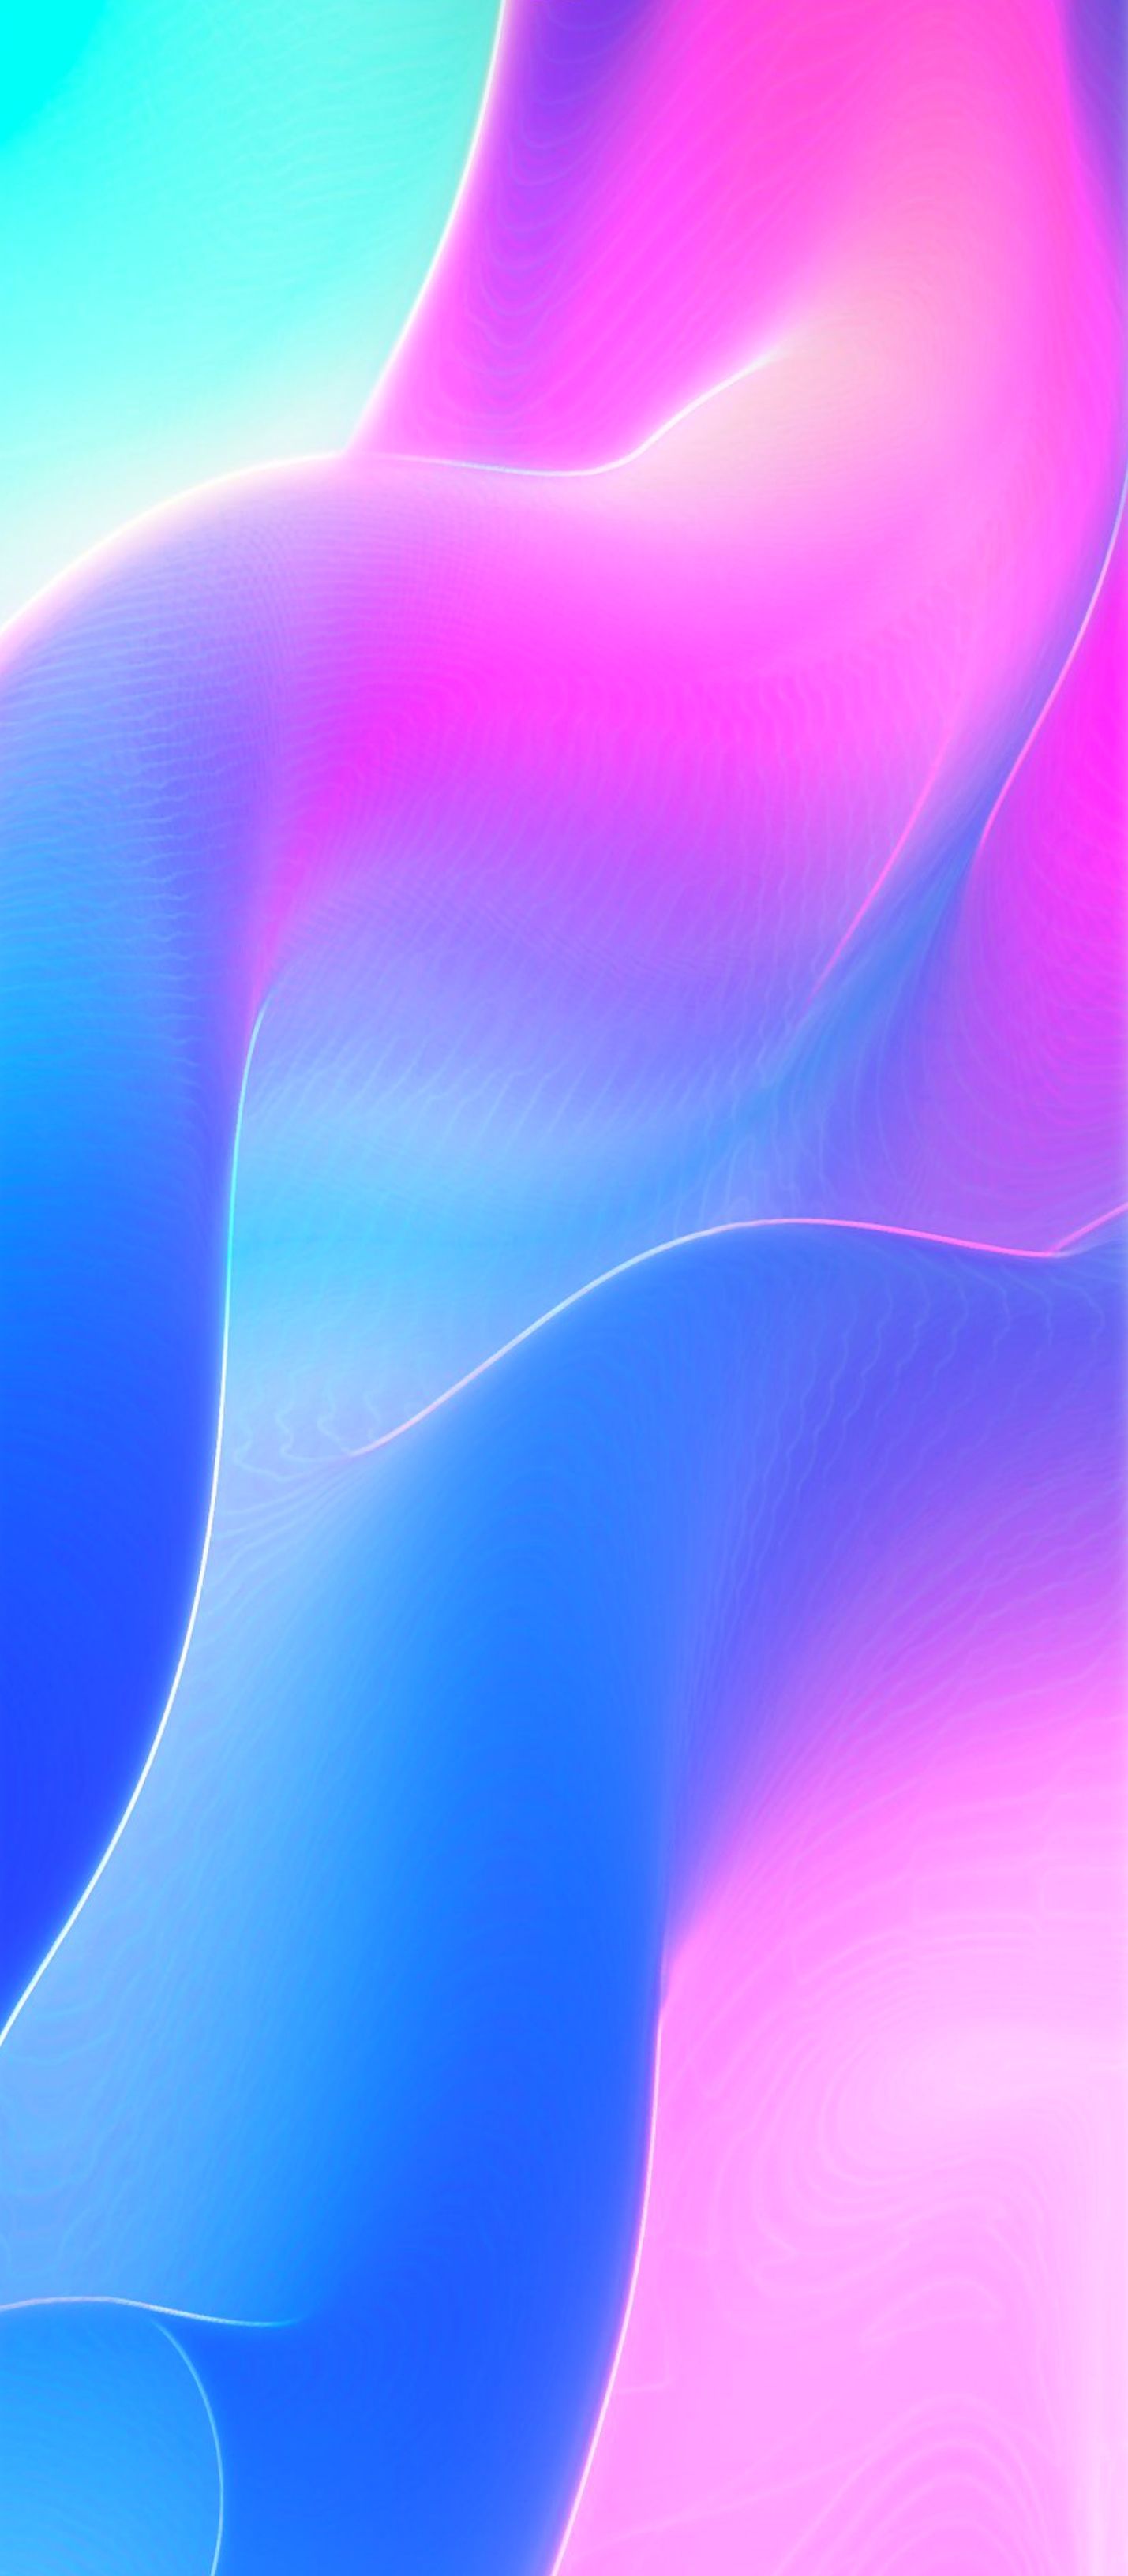 Mi Note 10 Lite Wallpaper (YTECHB Exclusive). Mkbhd wallpaper, Wallpaper, Galaxy phone wallpaper